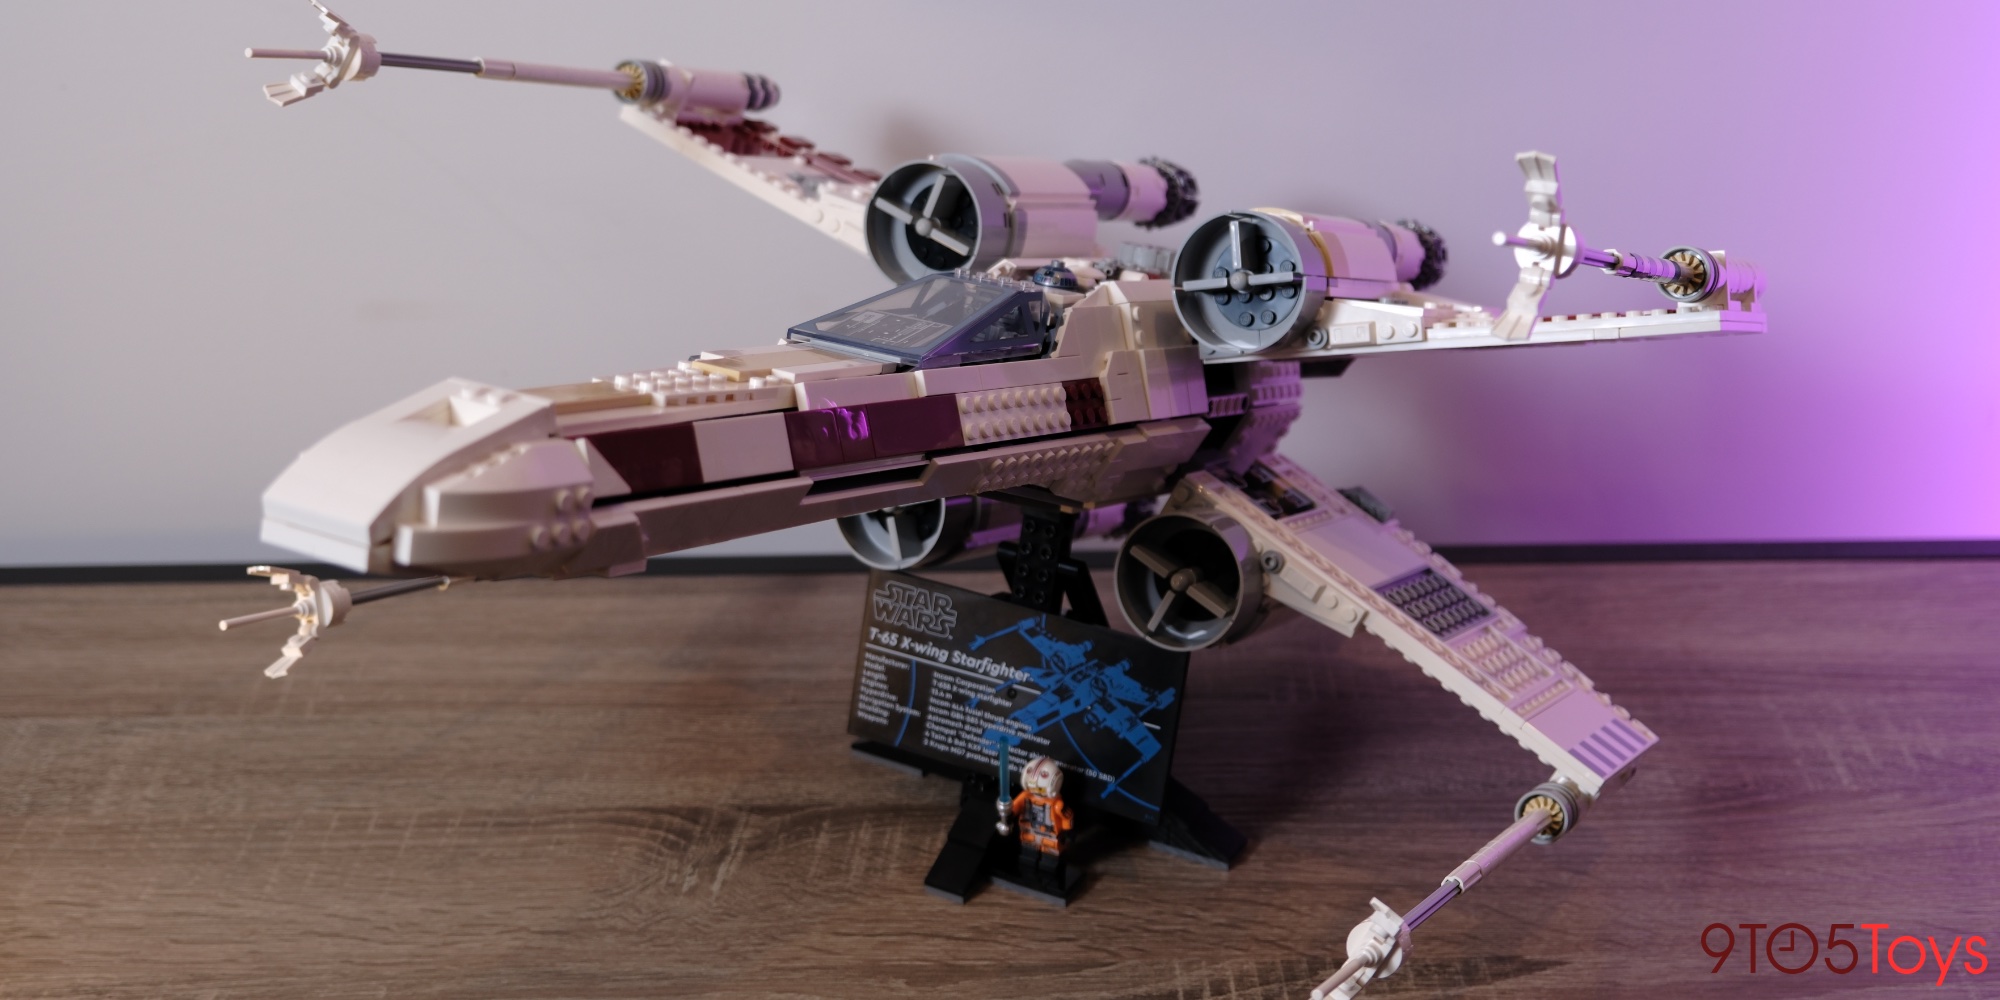 Life-sized Star Wars X-Wing fighter is world's largest LEGO model